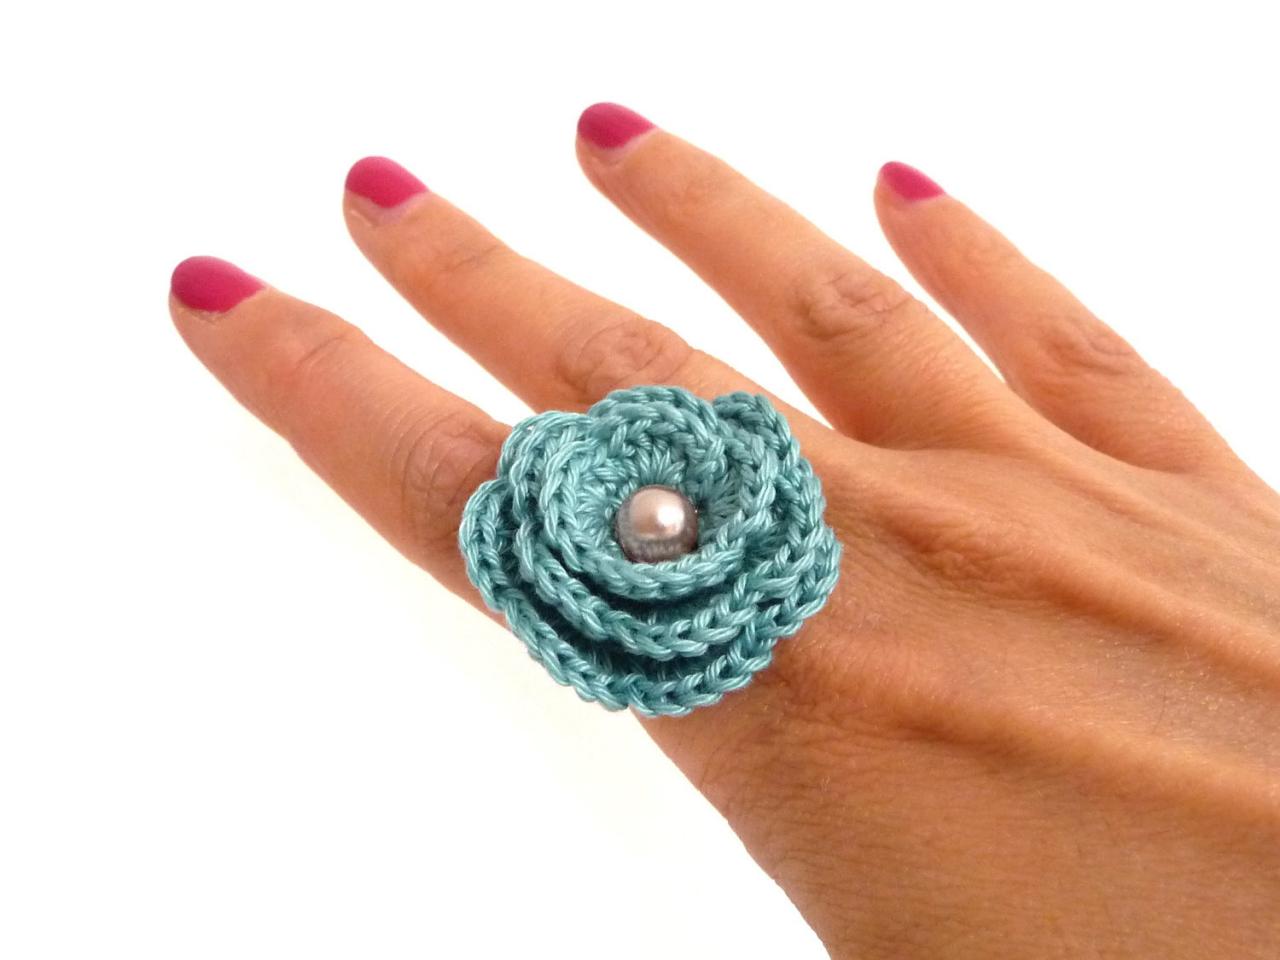 Crochet Flower Adjustable Ring - Mint Green Cotton Rose, Summer, Spring, Cocktail, Romantic Ring - Bridesmaid, Friend, Valentines Gift